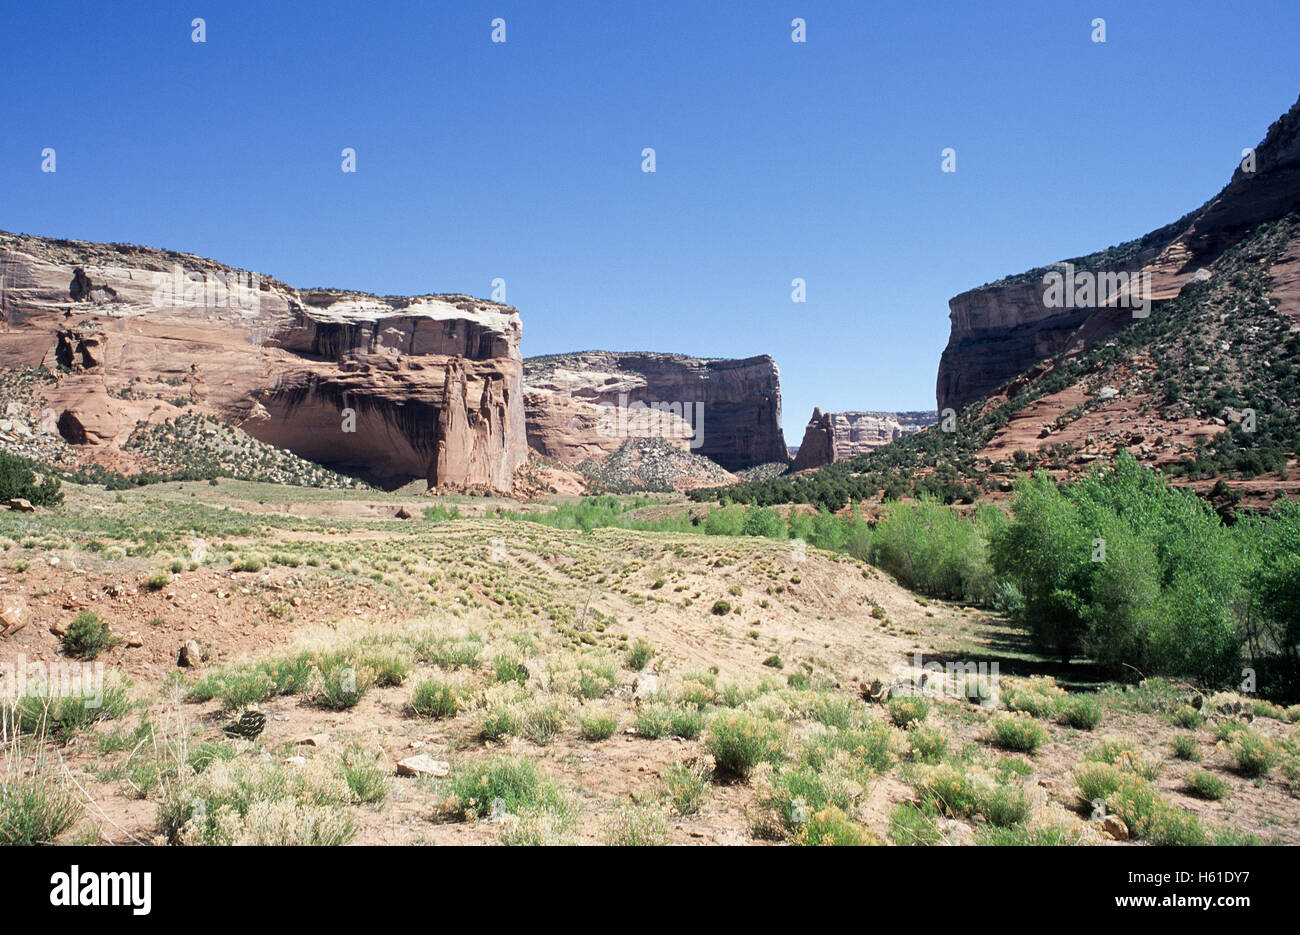 View of Canyon de Chelly National Monument from ground level, Arizona Stock Photo